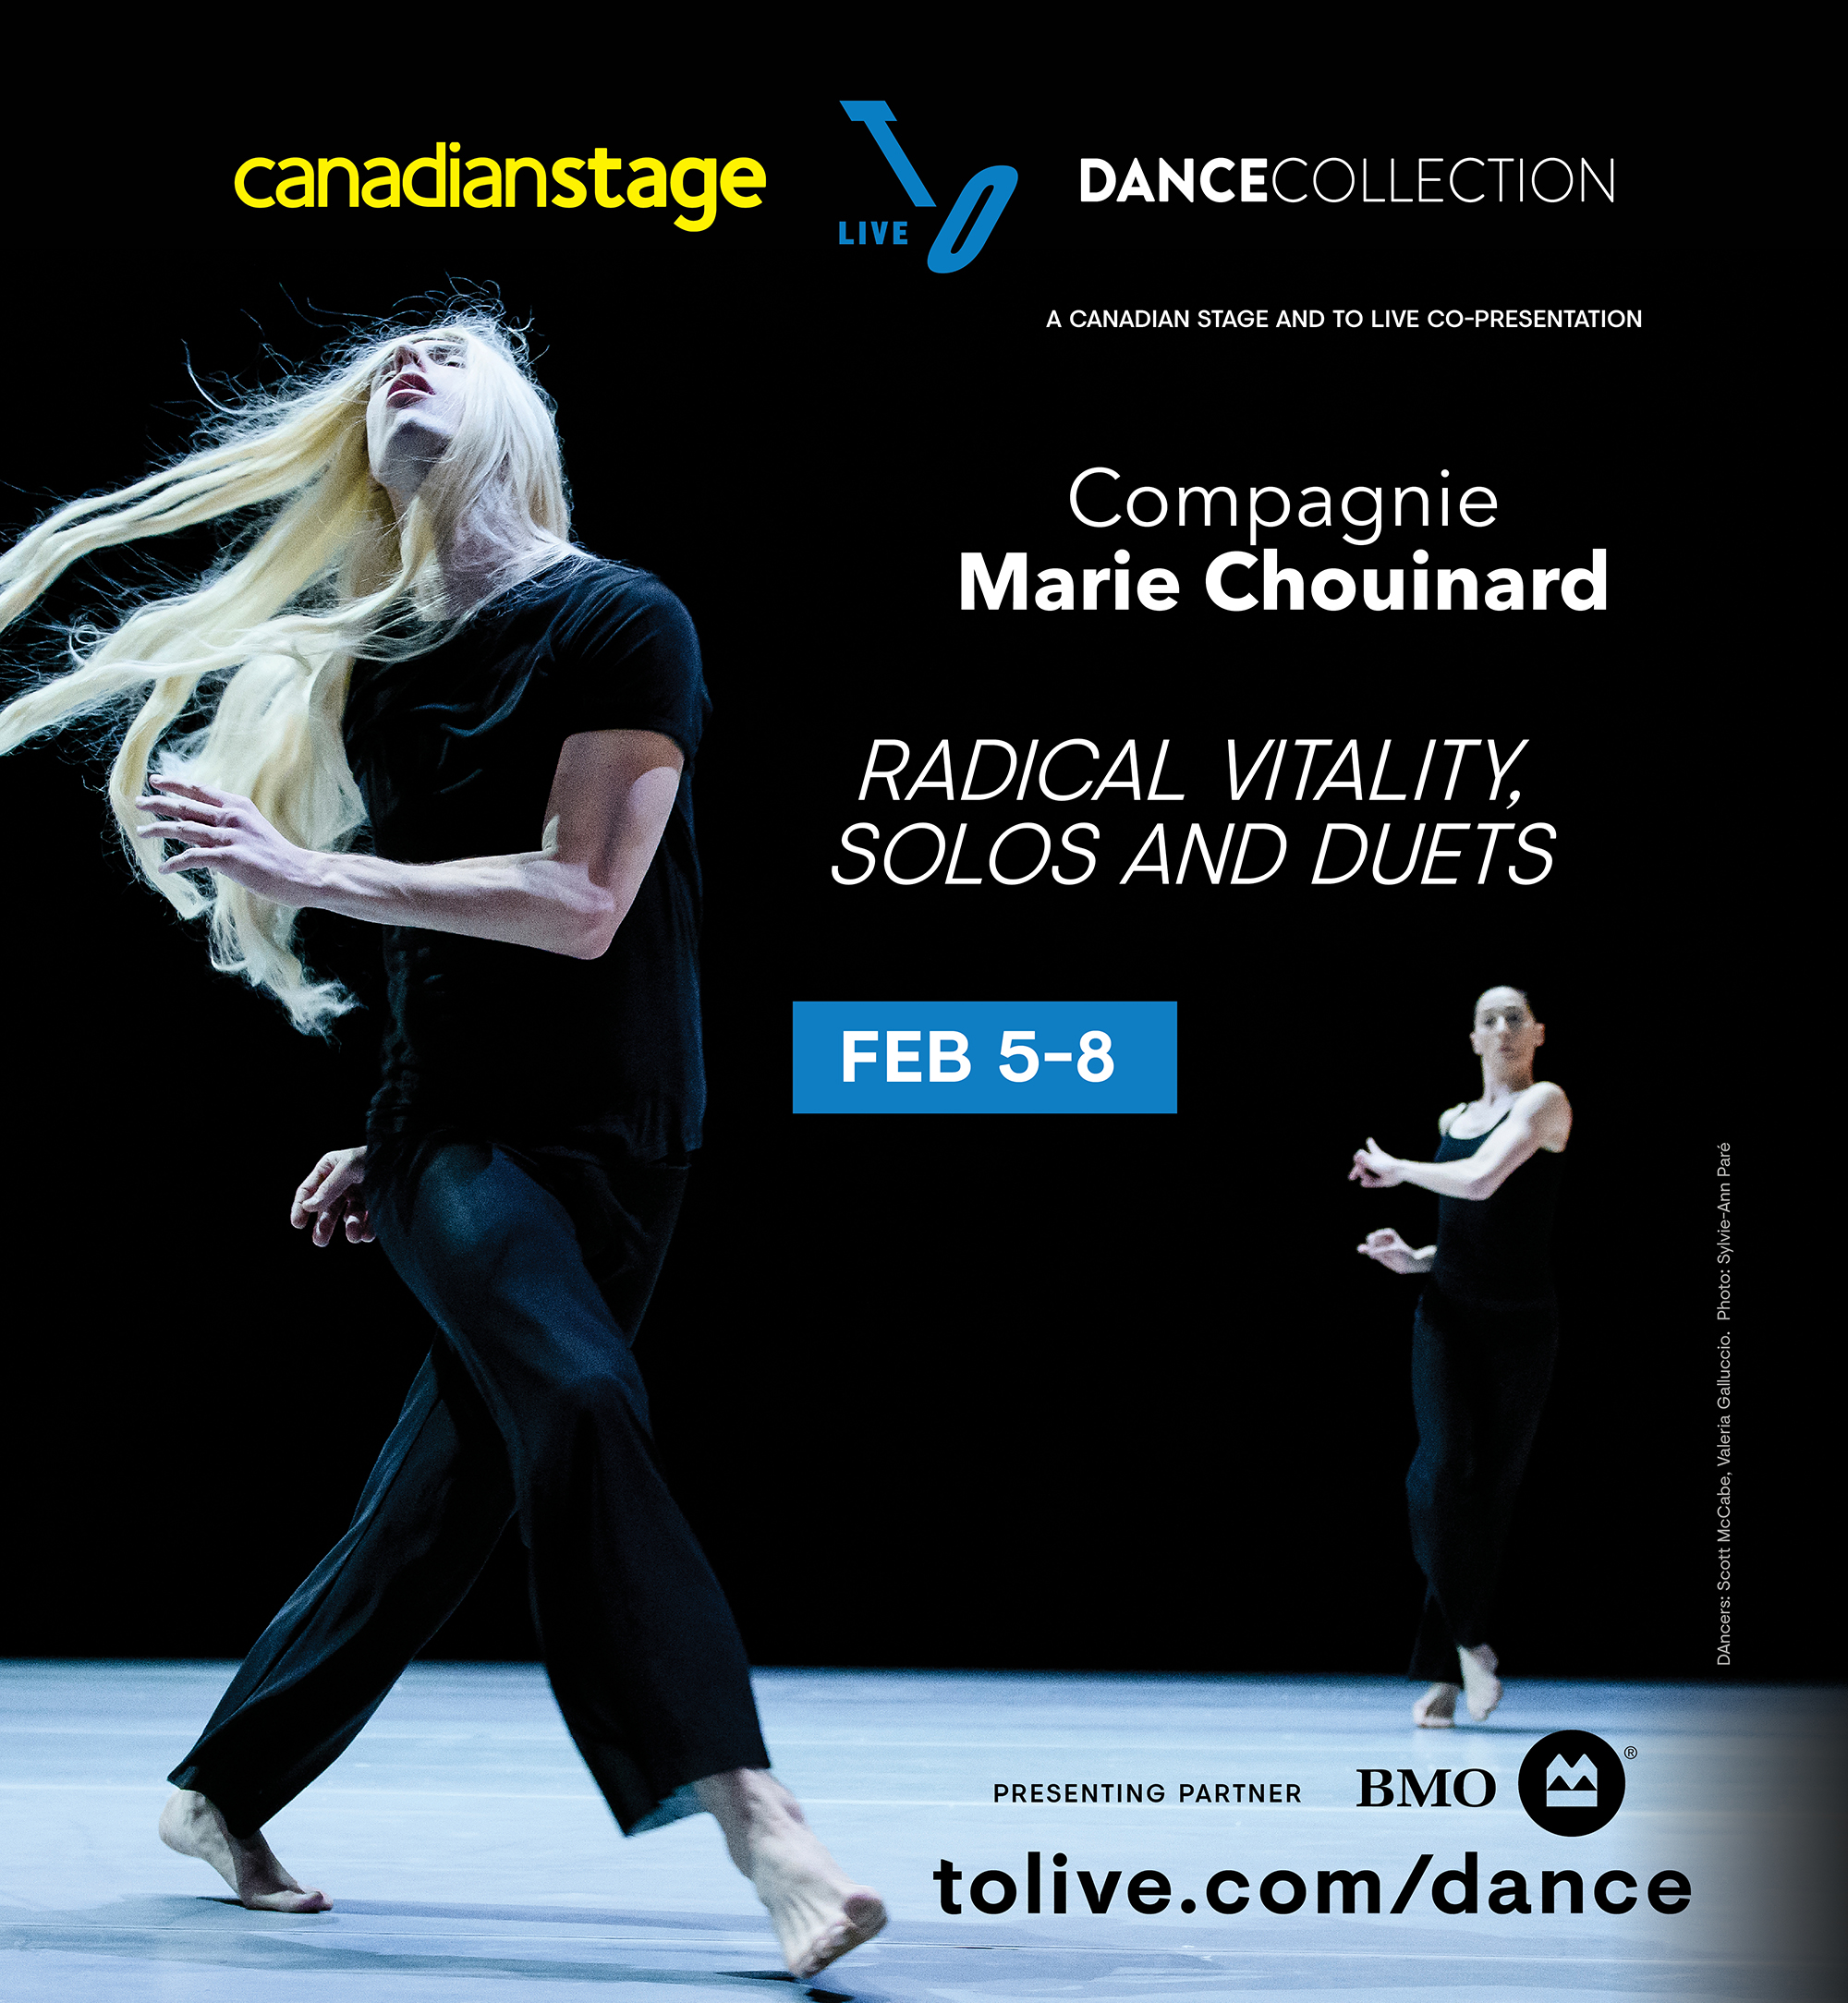 Two dancers appear frozen in time, in the midst of dynamic movement. Around them, the text for the poster reads, "Canadian Stage, TO Live, Dance Collection: A Canadian Stage and TO Live Co-Production. Compagnie Marie Chouinard: Radical Vitality, Solos and Duets. Feb 5-8. Presenting partner, BMO. tolive.com/dance.